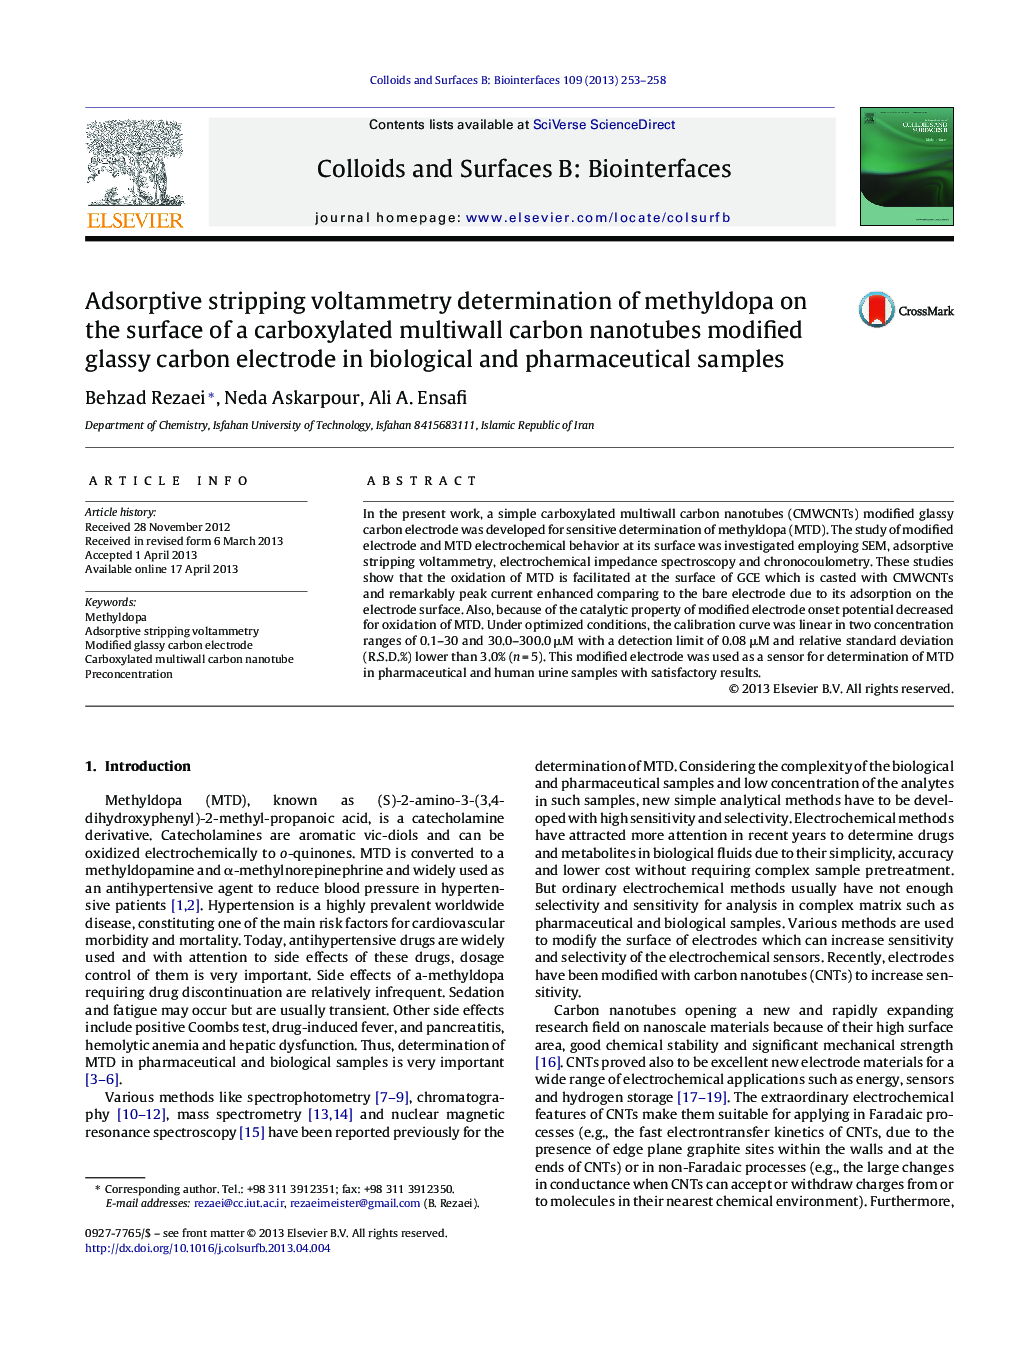 Adsorptive stripping voltammetry determination of methyldopa on the surface of a carboxylated multiwall carbon nanotubes modified glassy carbon electrode in biological and pharmaceutical samples